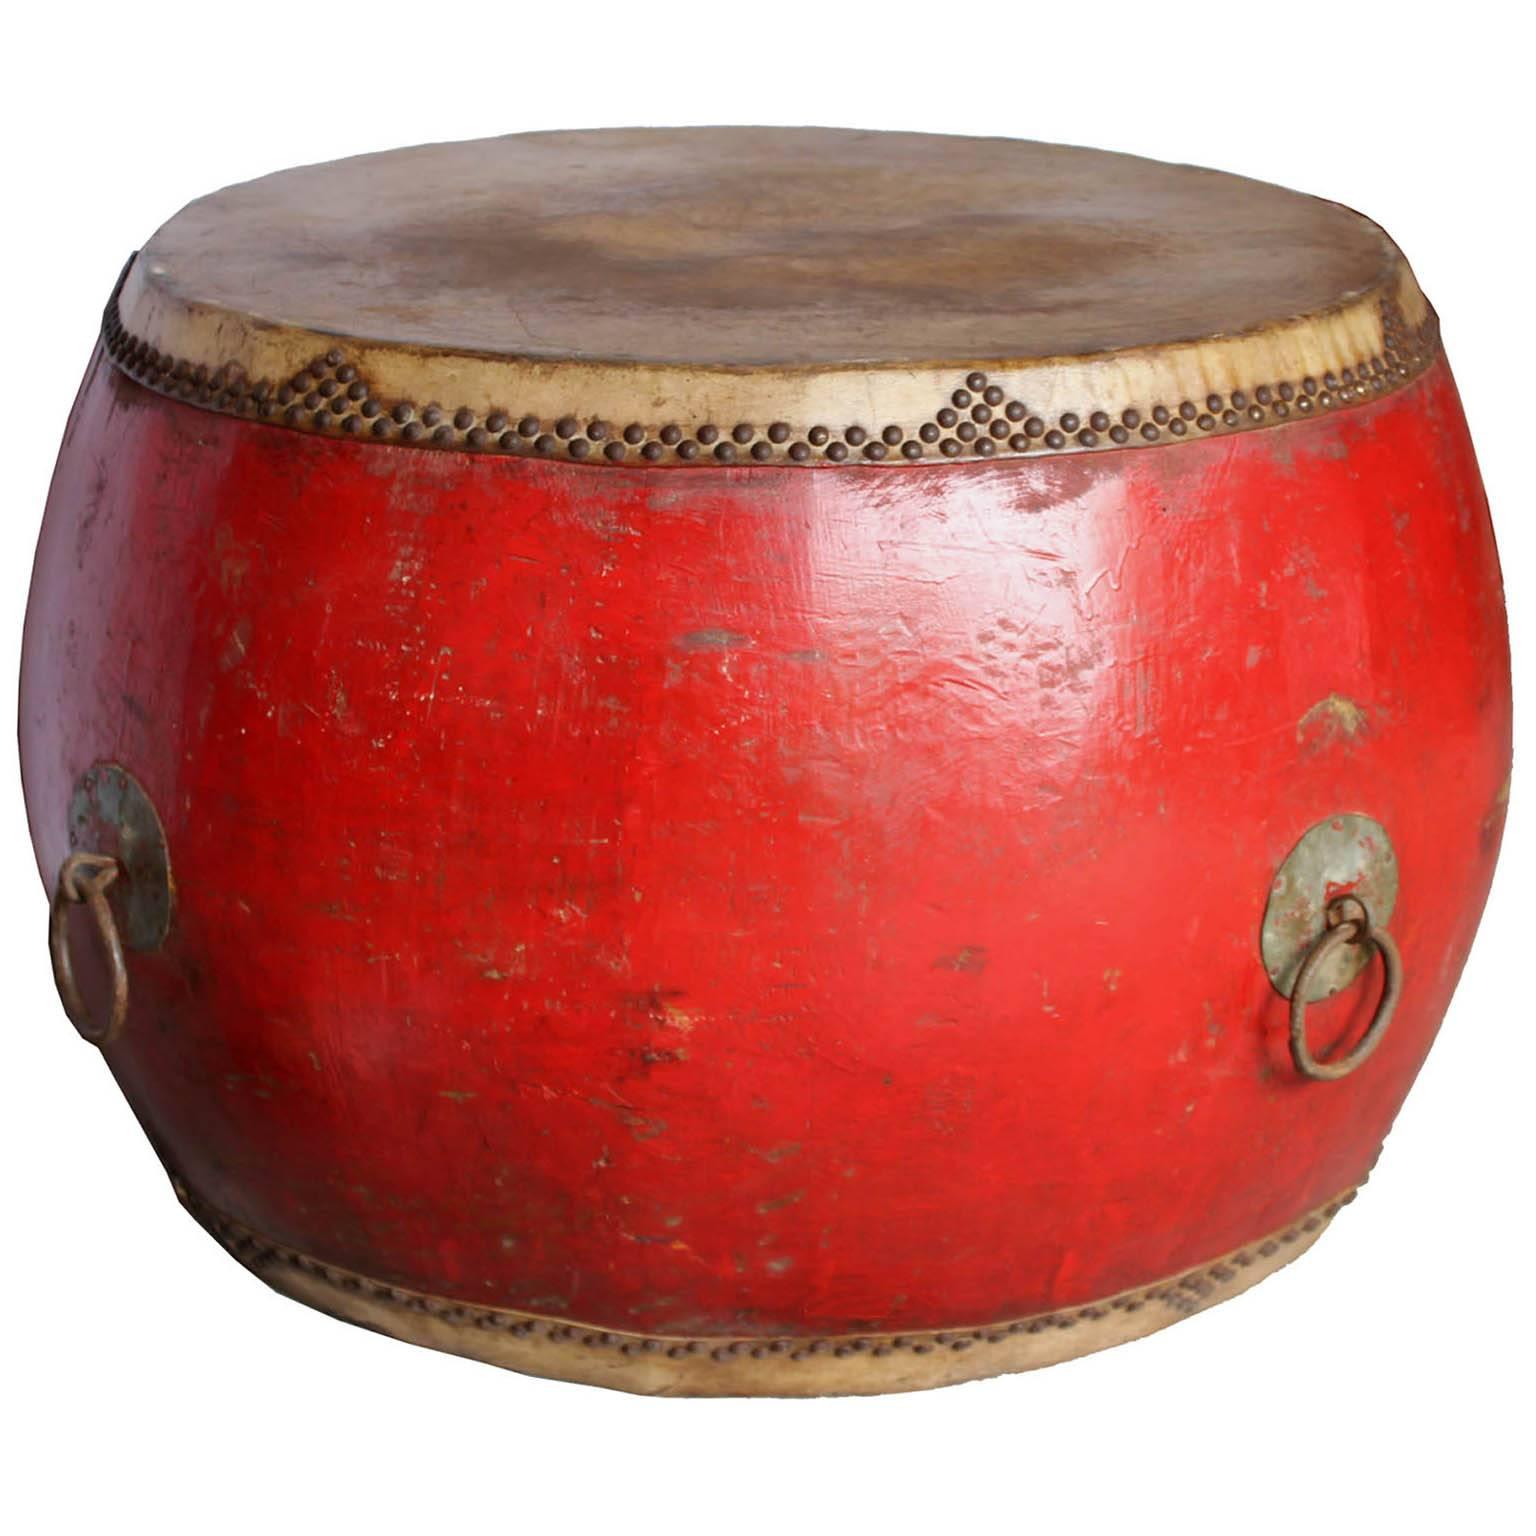 Original vintage drum was used in ceremonies to celebrate various community events. Red lacquer drum with elmwood base and leather covers makes an interesting table.